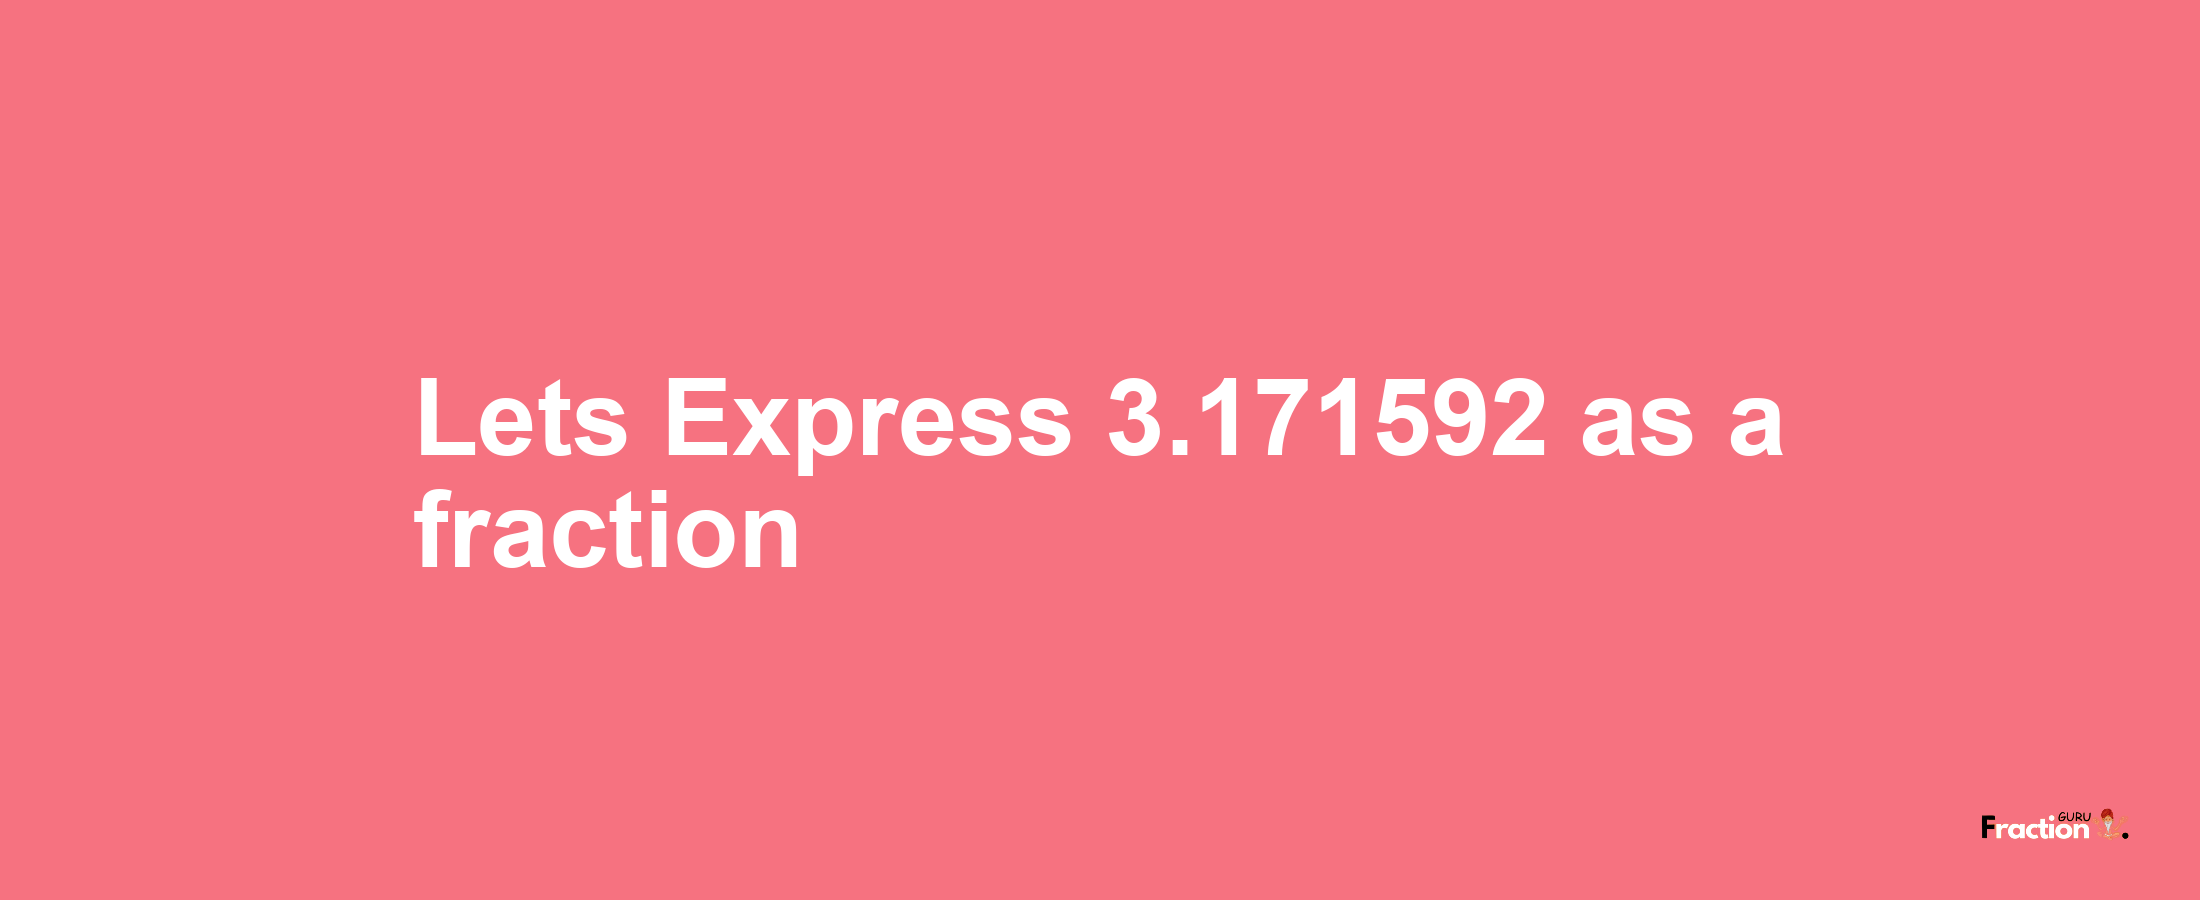 Lets Express 3.171592 as afraction